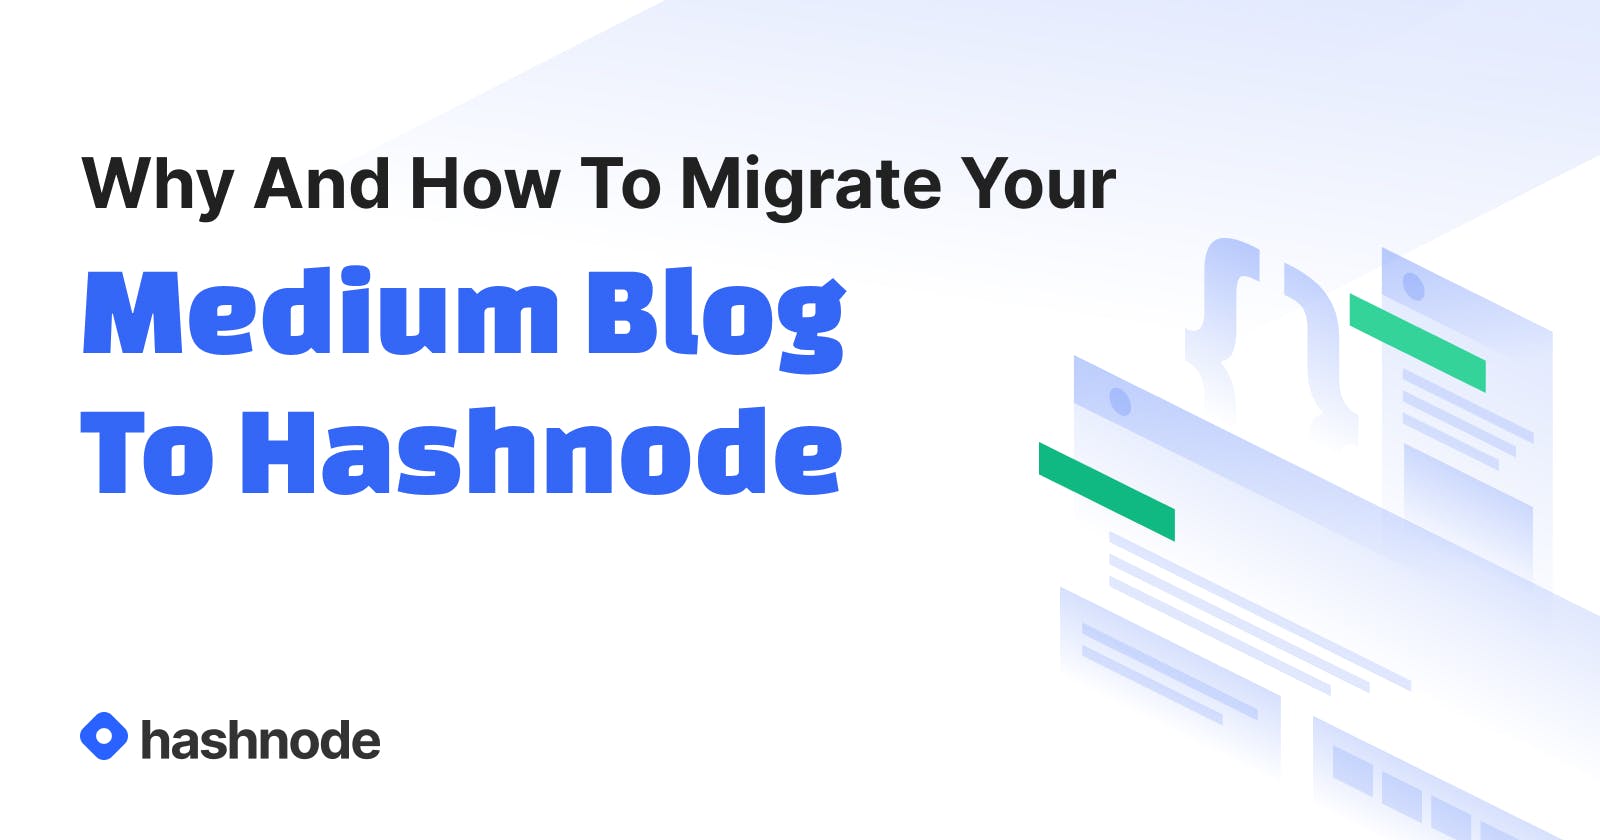 Why And How To Migrate Your Medium Blog To Hashnode